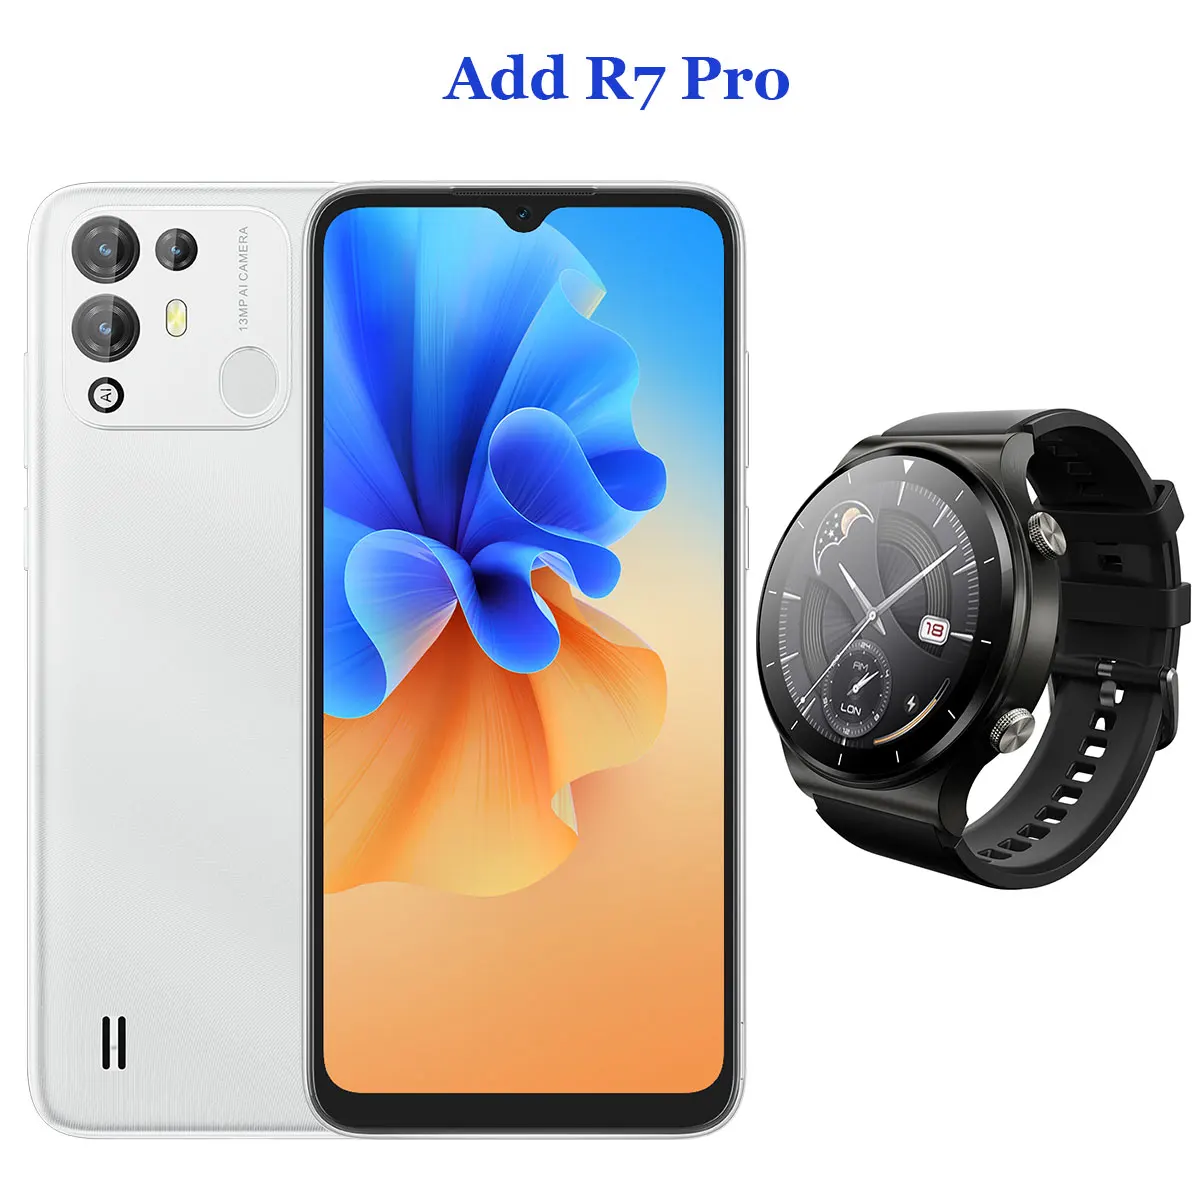 Blackview A55 Pro Smartphone Android 11 6.528" HD+ Display Mobile Phone 64GB Helio P22 Octa Core 13MP Camera 4780mAh 3 Card Slot xfinity mobile android phones Android Phones